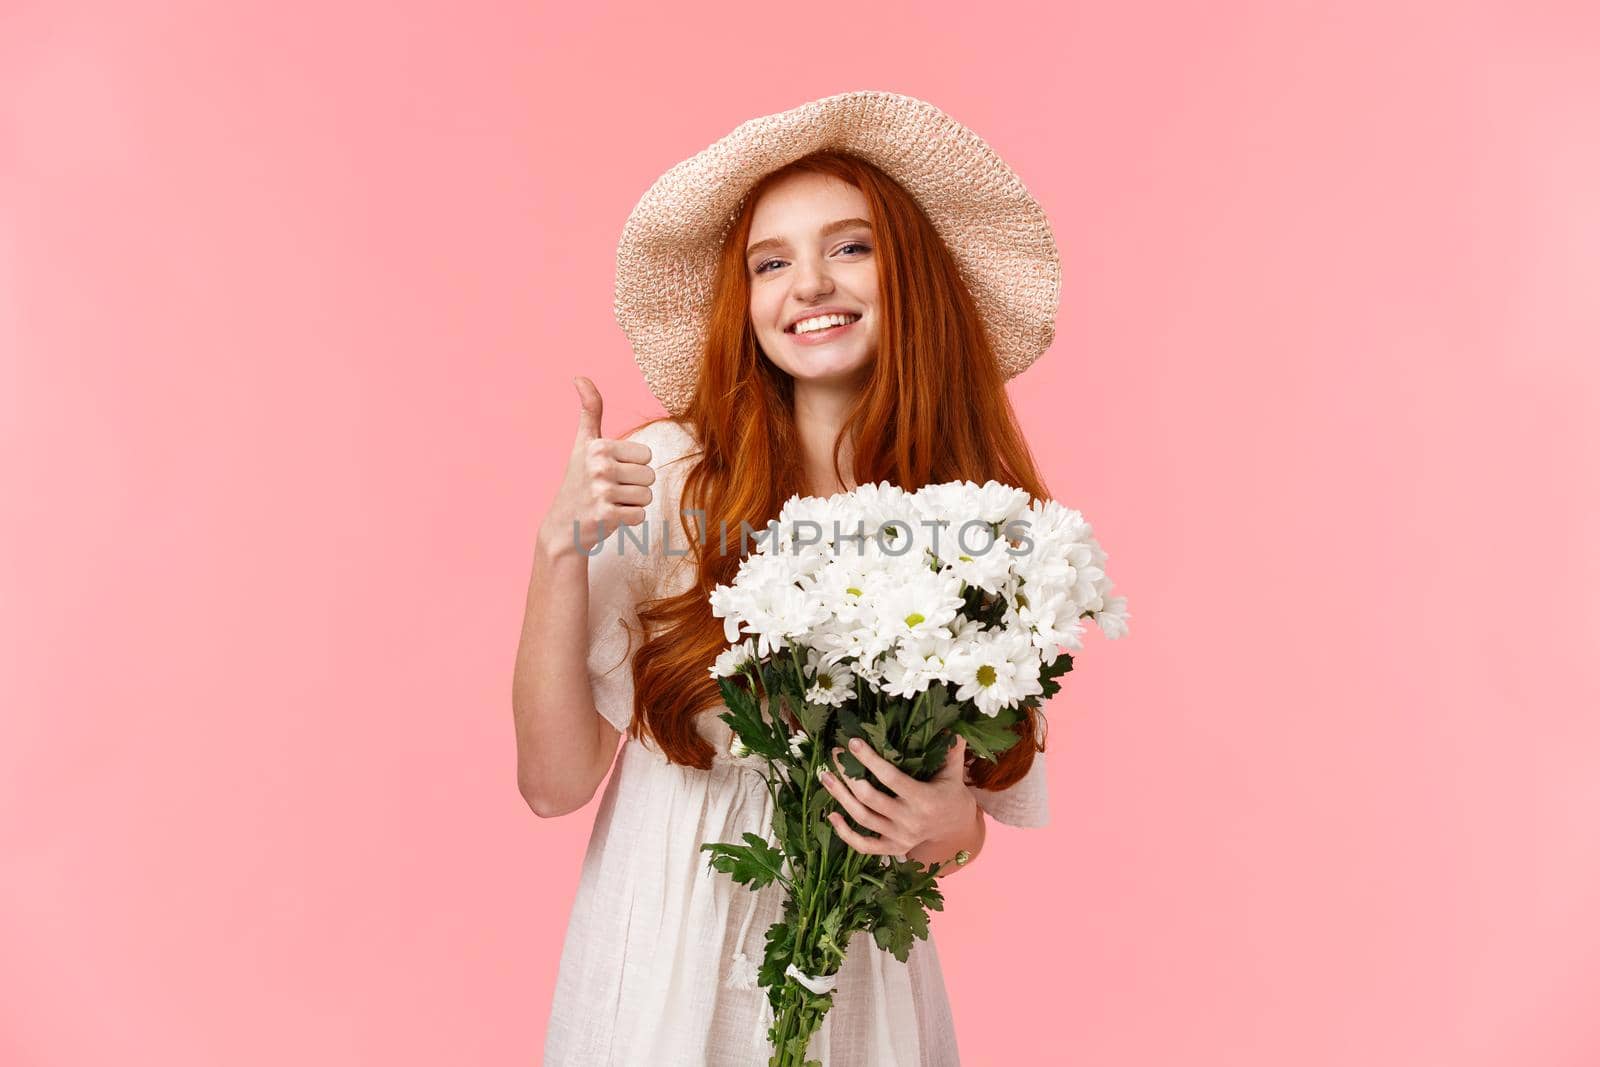 Woman prepared present for mothers day, standing cheerful and delighted, bought white beautiful flowers, showing thumb-up and smiling satisfied as holding bouquet, stand pink background.